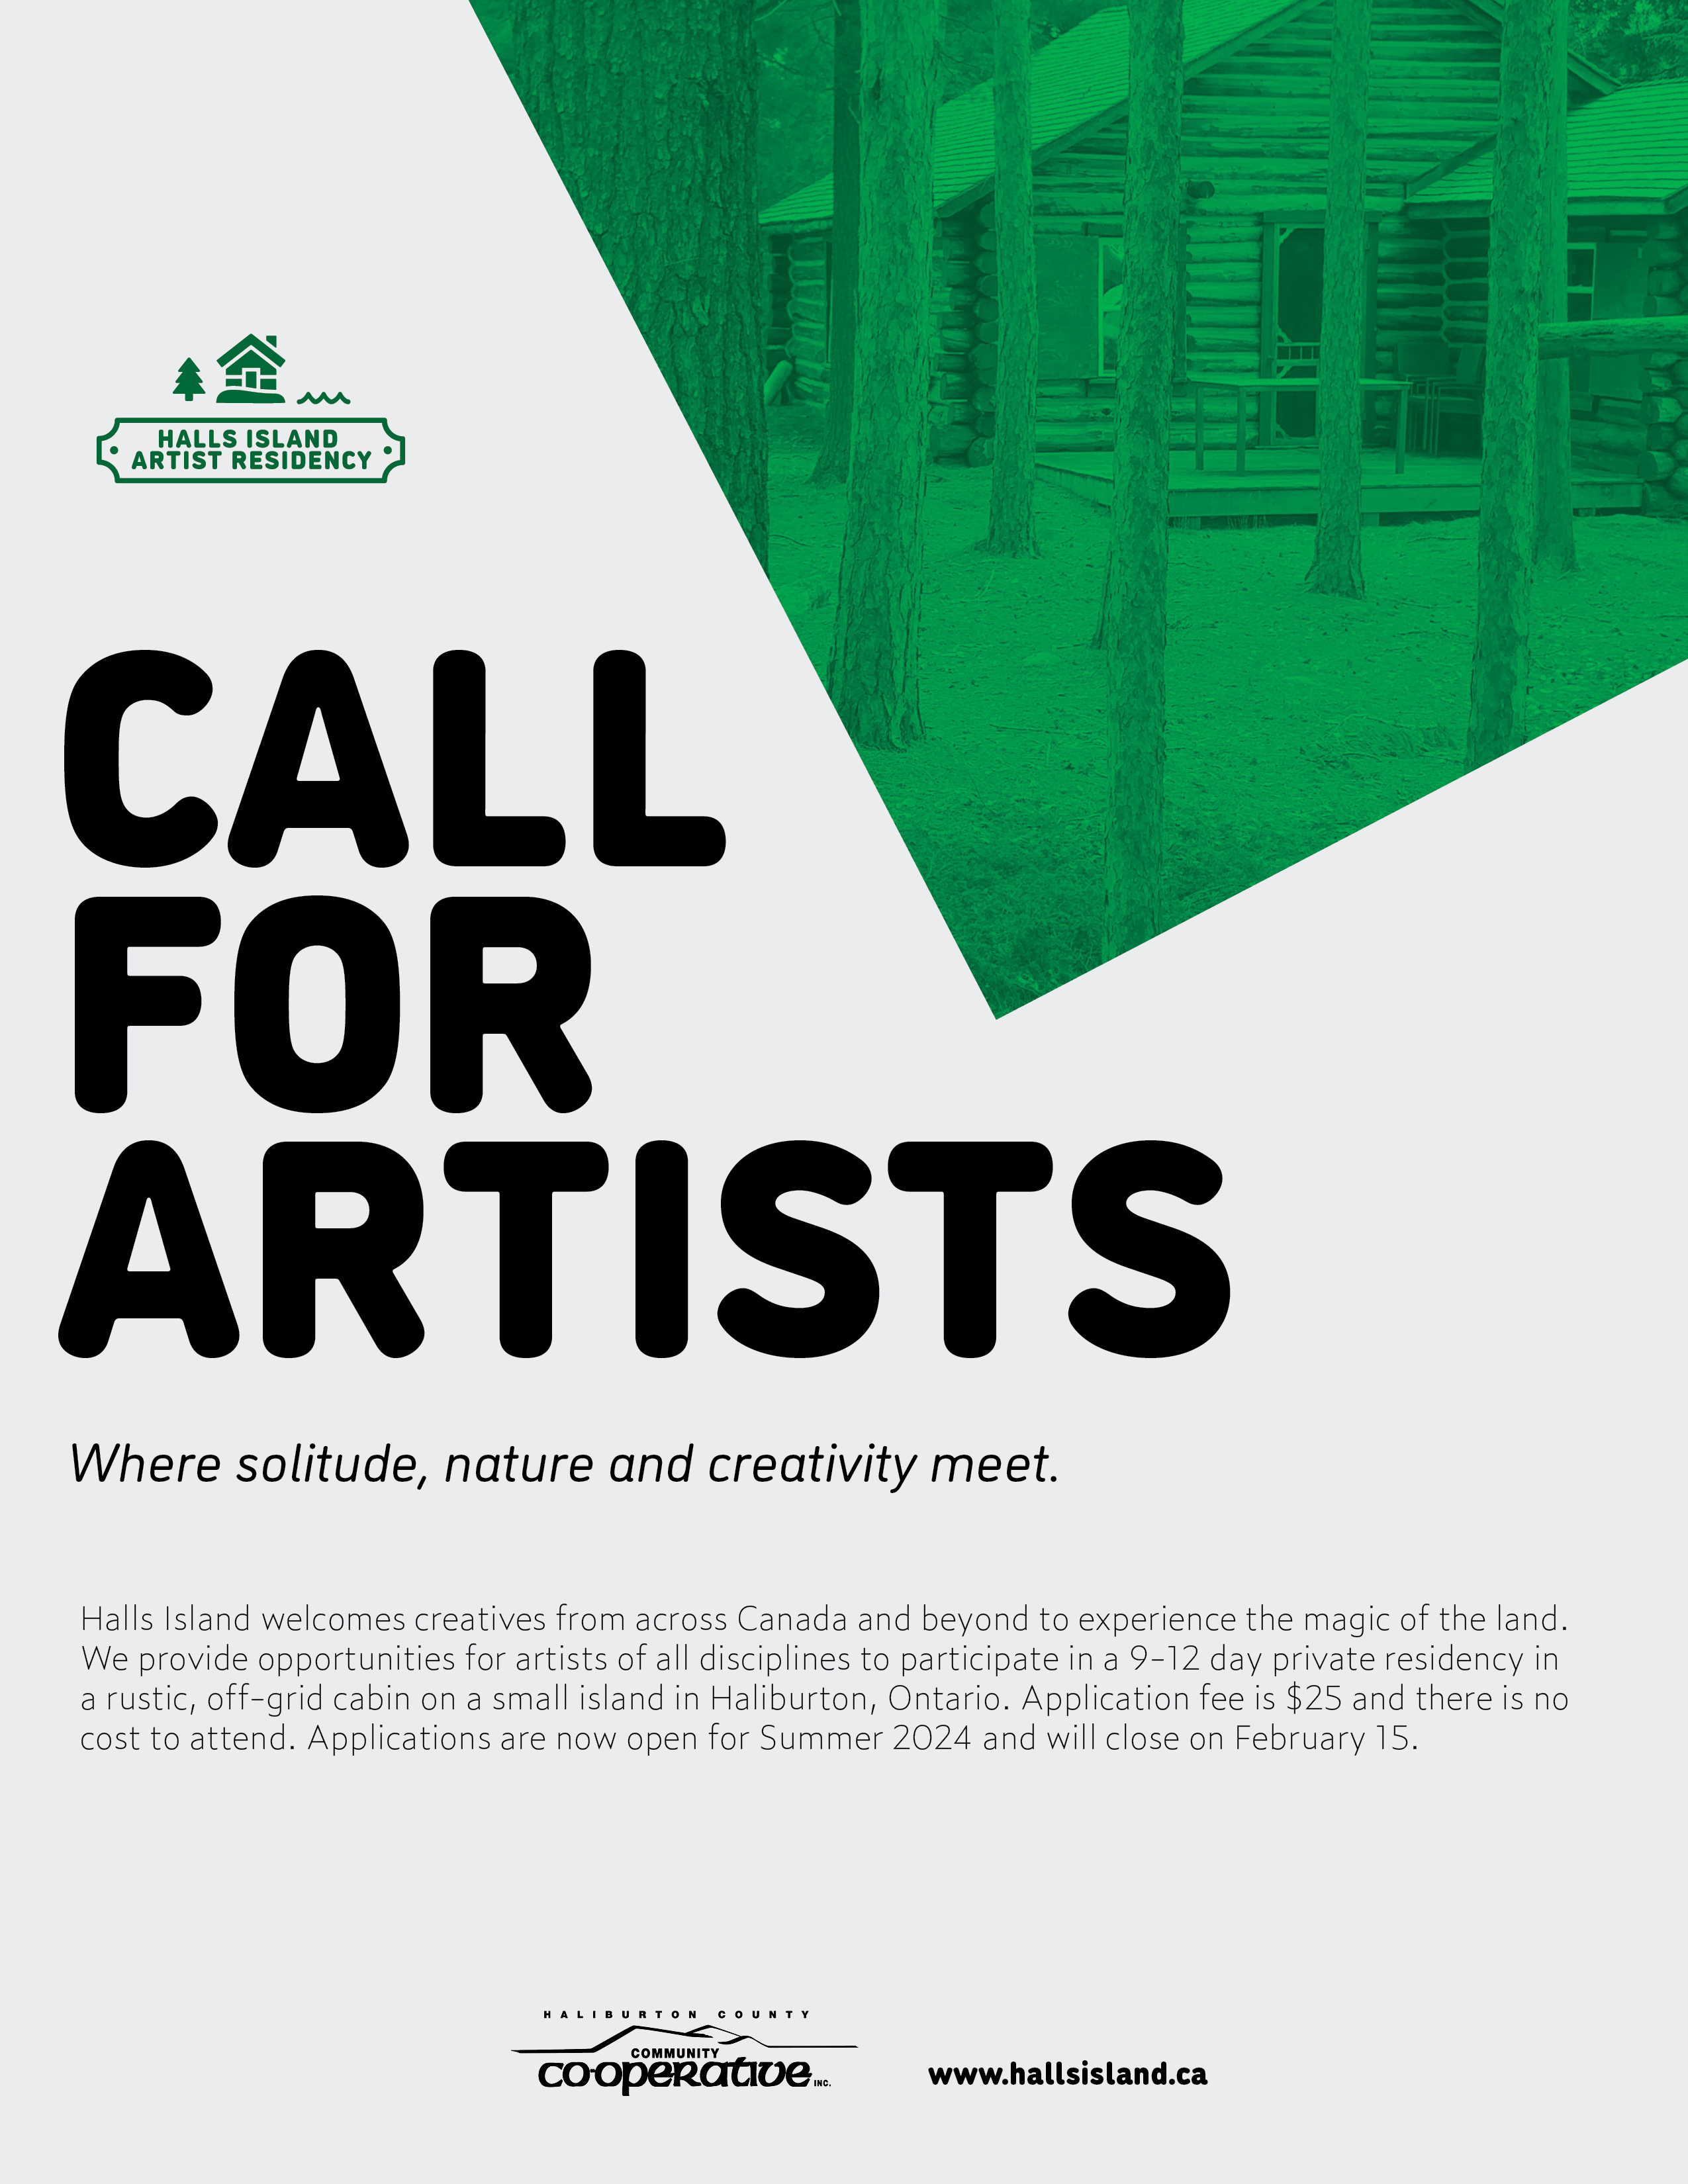 Call for Artists poster with cabin image in the background